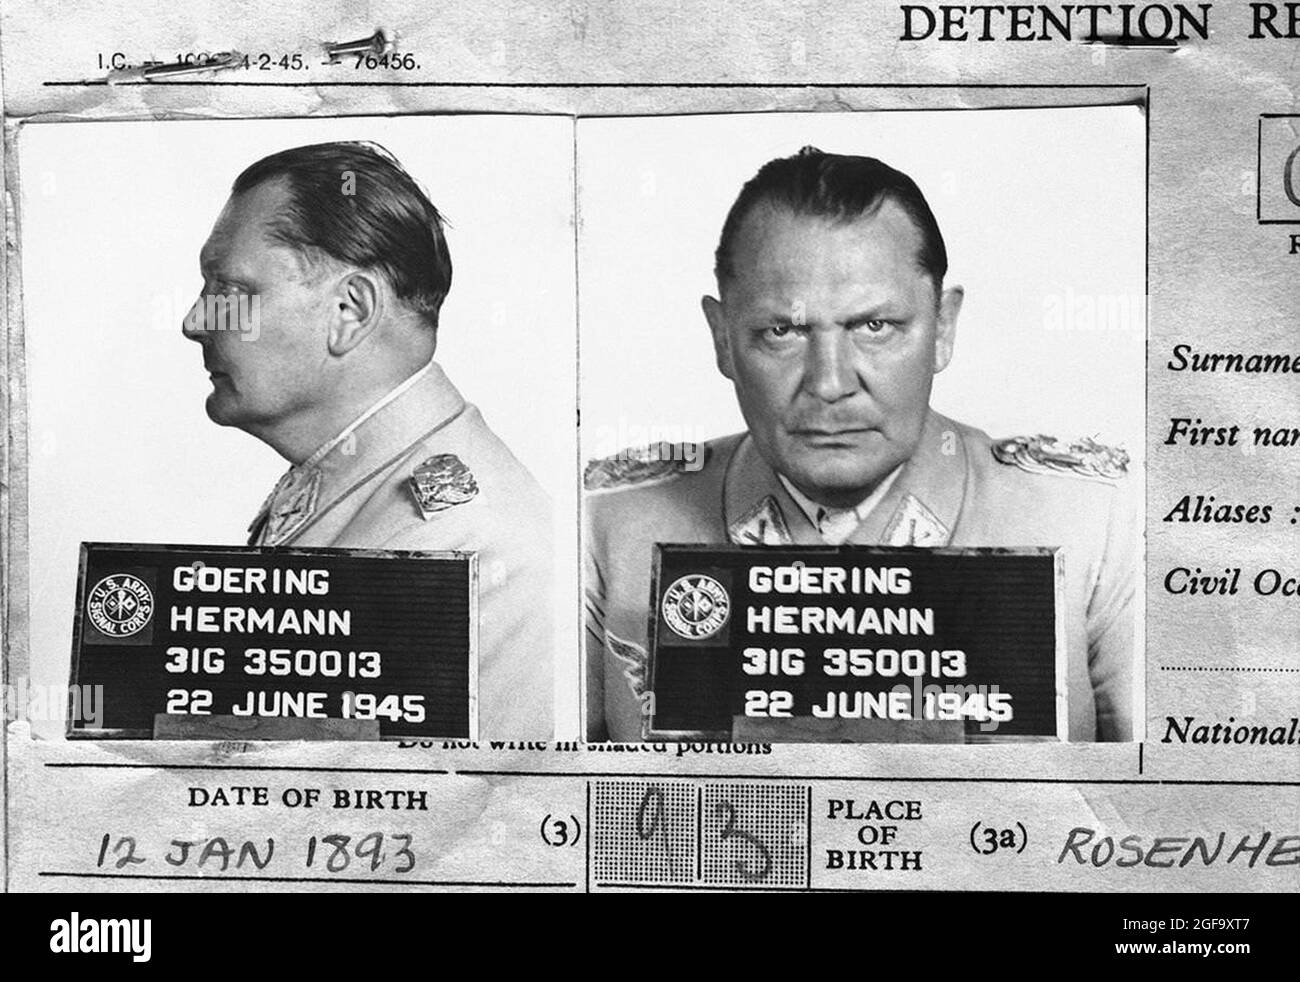 The 1945 detention record Nazi head of the Luftwaffe Germann Göring, after he was captured in 1945, tried and condemned to death at Nuremberg in 1946. He committed suicide hours before he was due to be hanged. Stock Photo